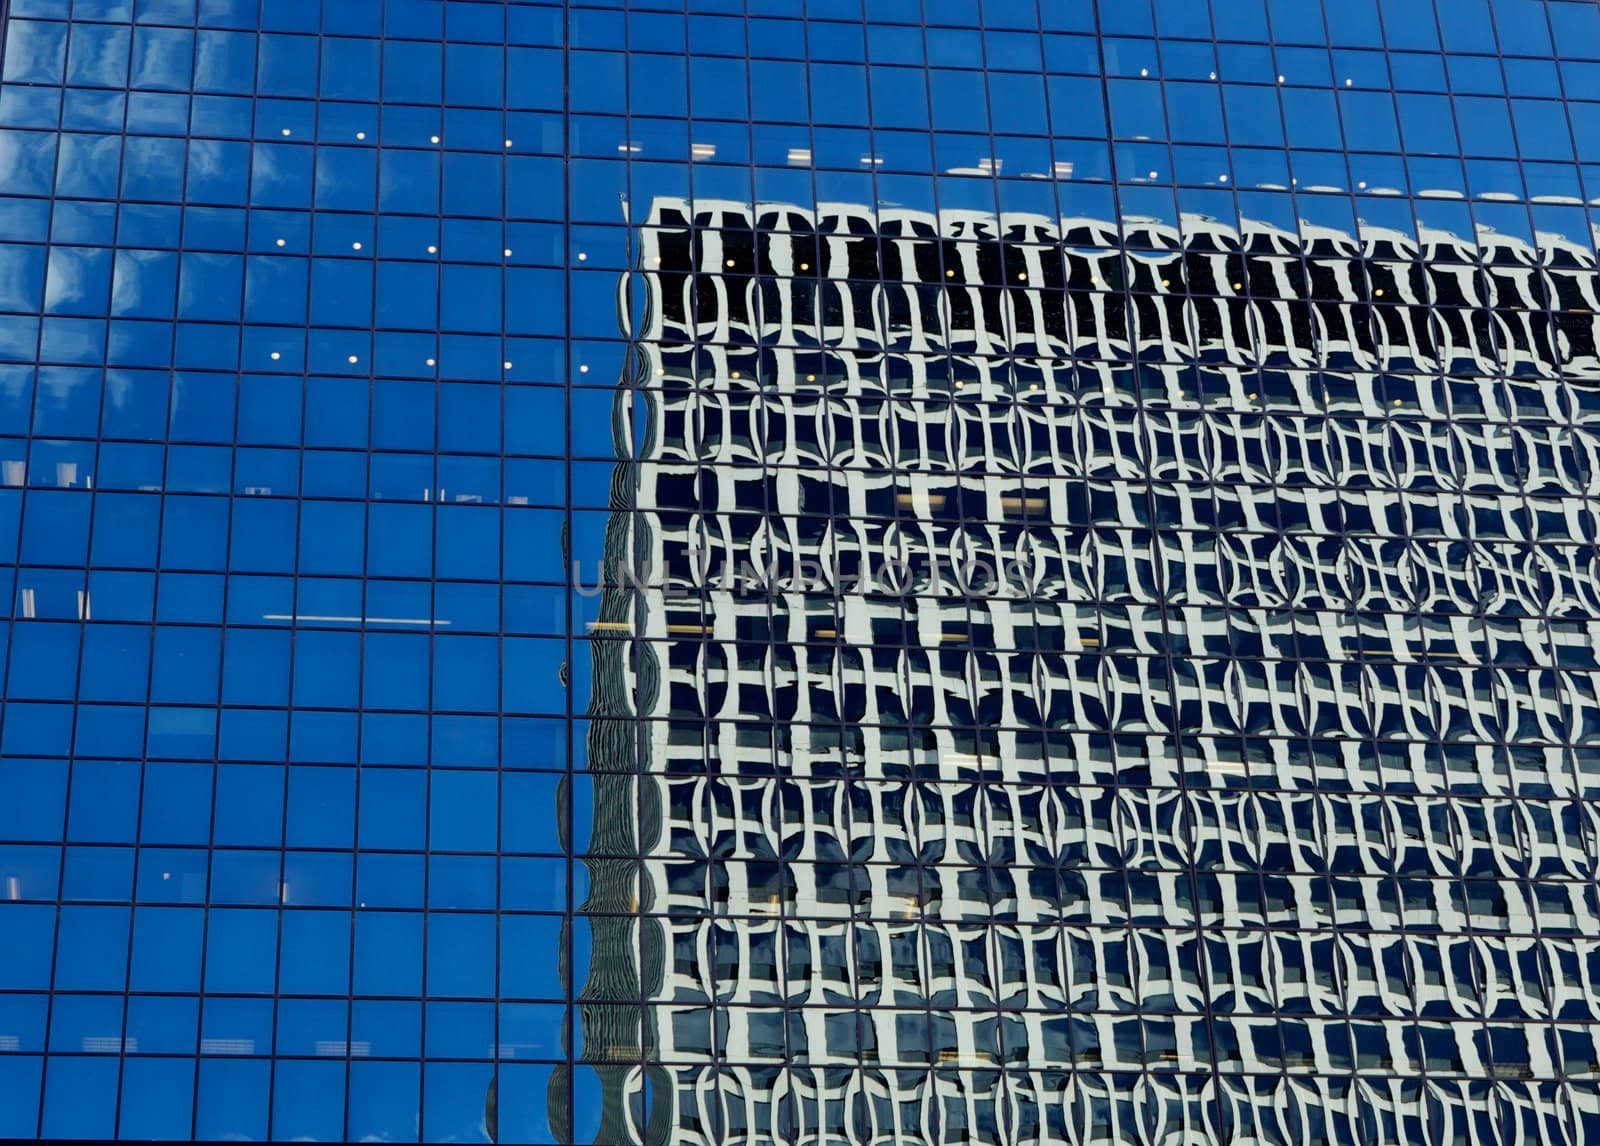 Interesting reflections on the mirrored window surface of an office building